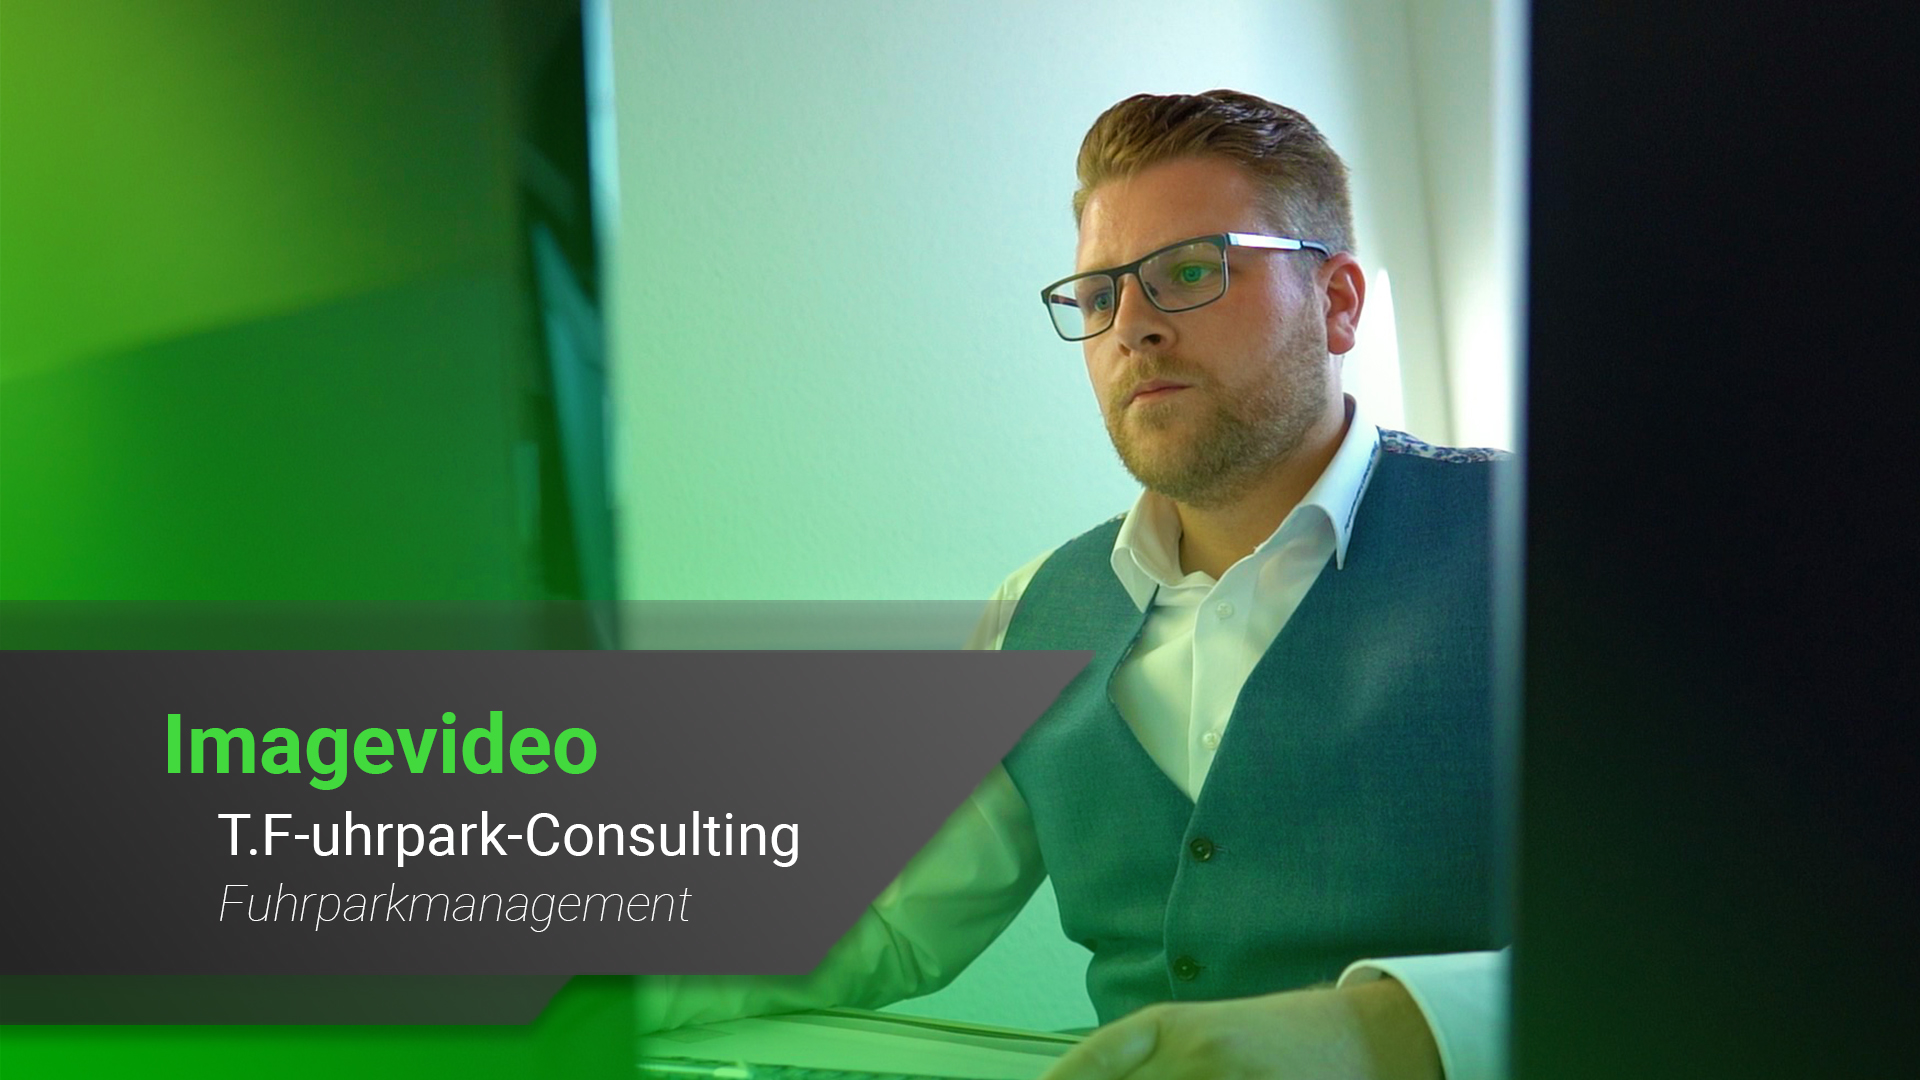 T.F-uhrpark-Consulting